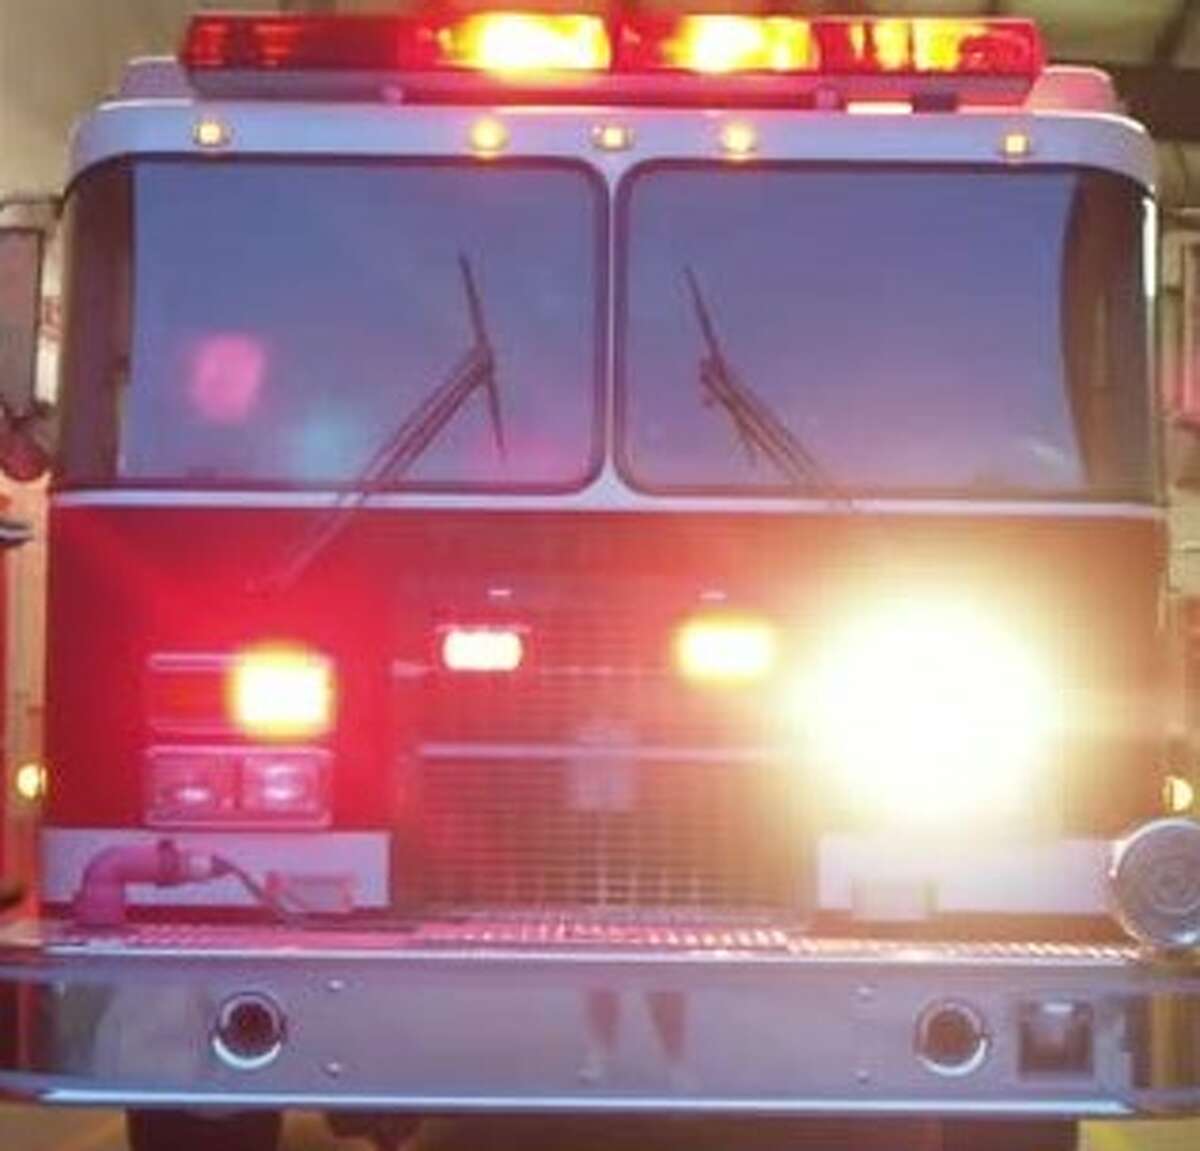 A Thursday afternoon fire in Troy has claimed the life of a woman.